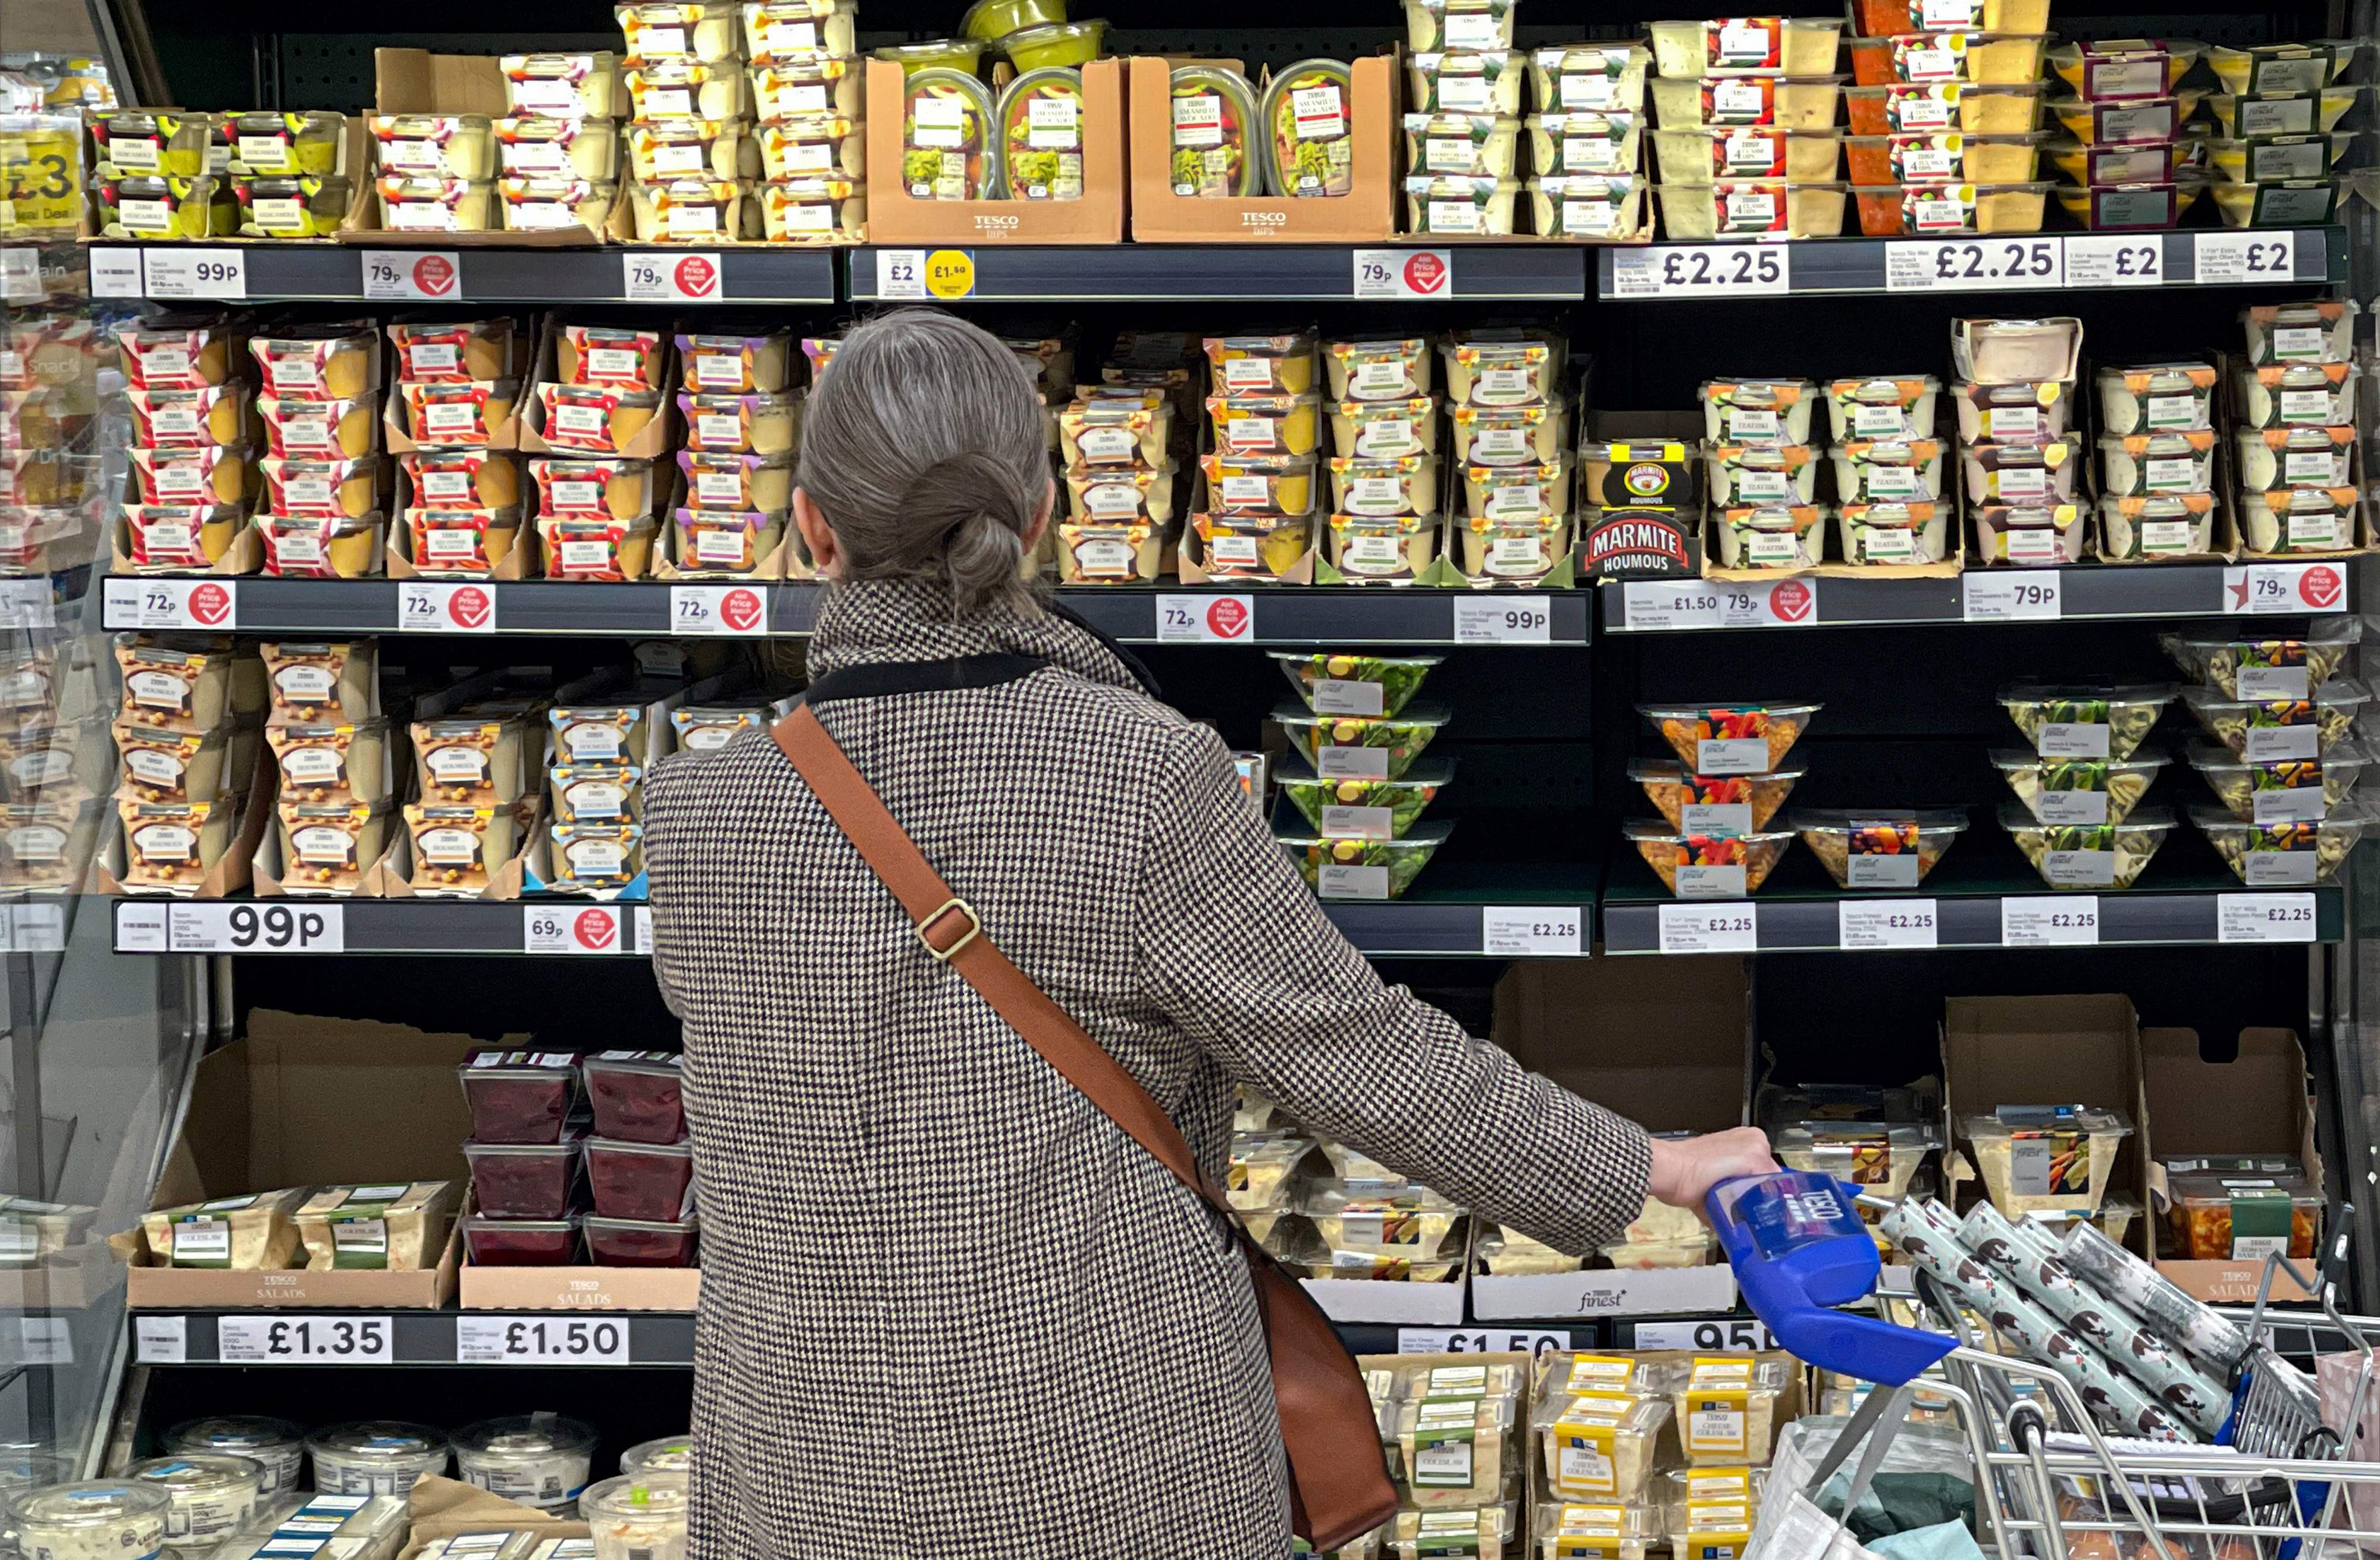 The supermarket more than doubled pre-tax profits and increased its already formidable market share